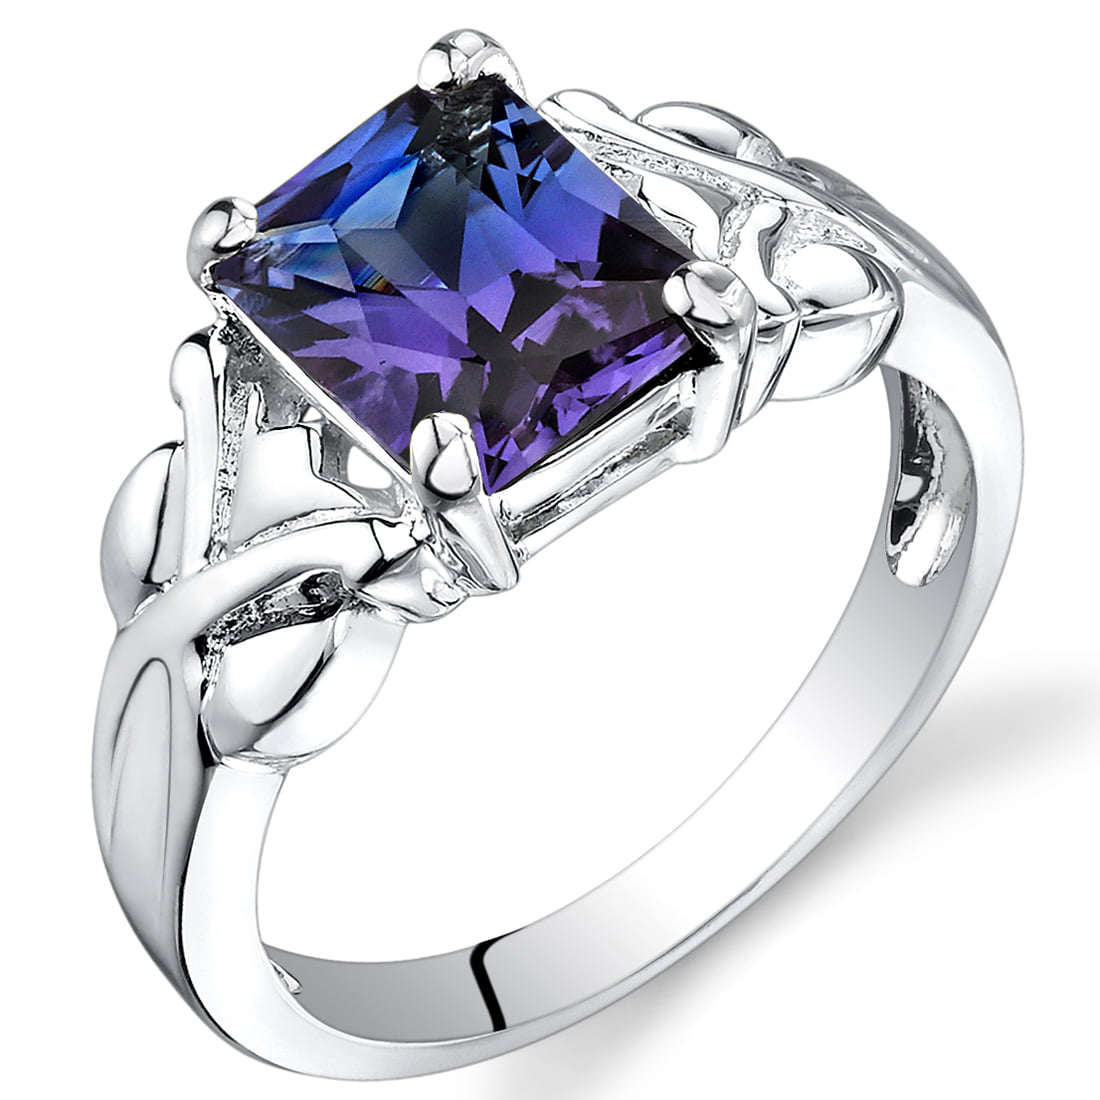 0.50 Ct Alexandrite & Diamond Oval Ring .925 Sterling Silver